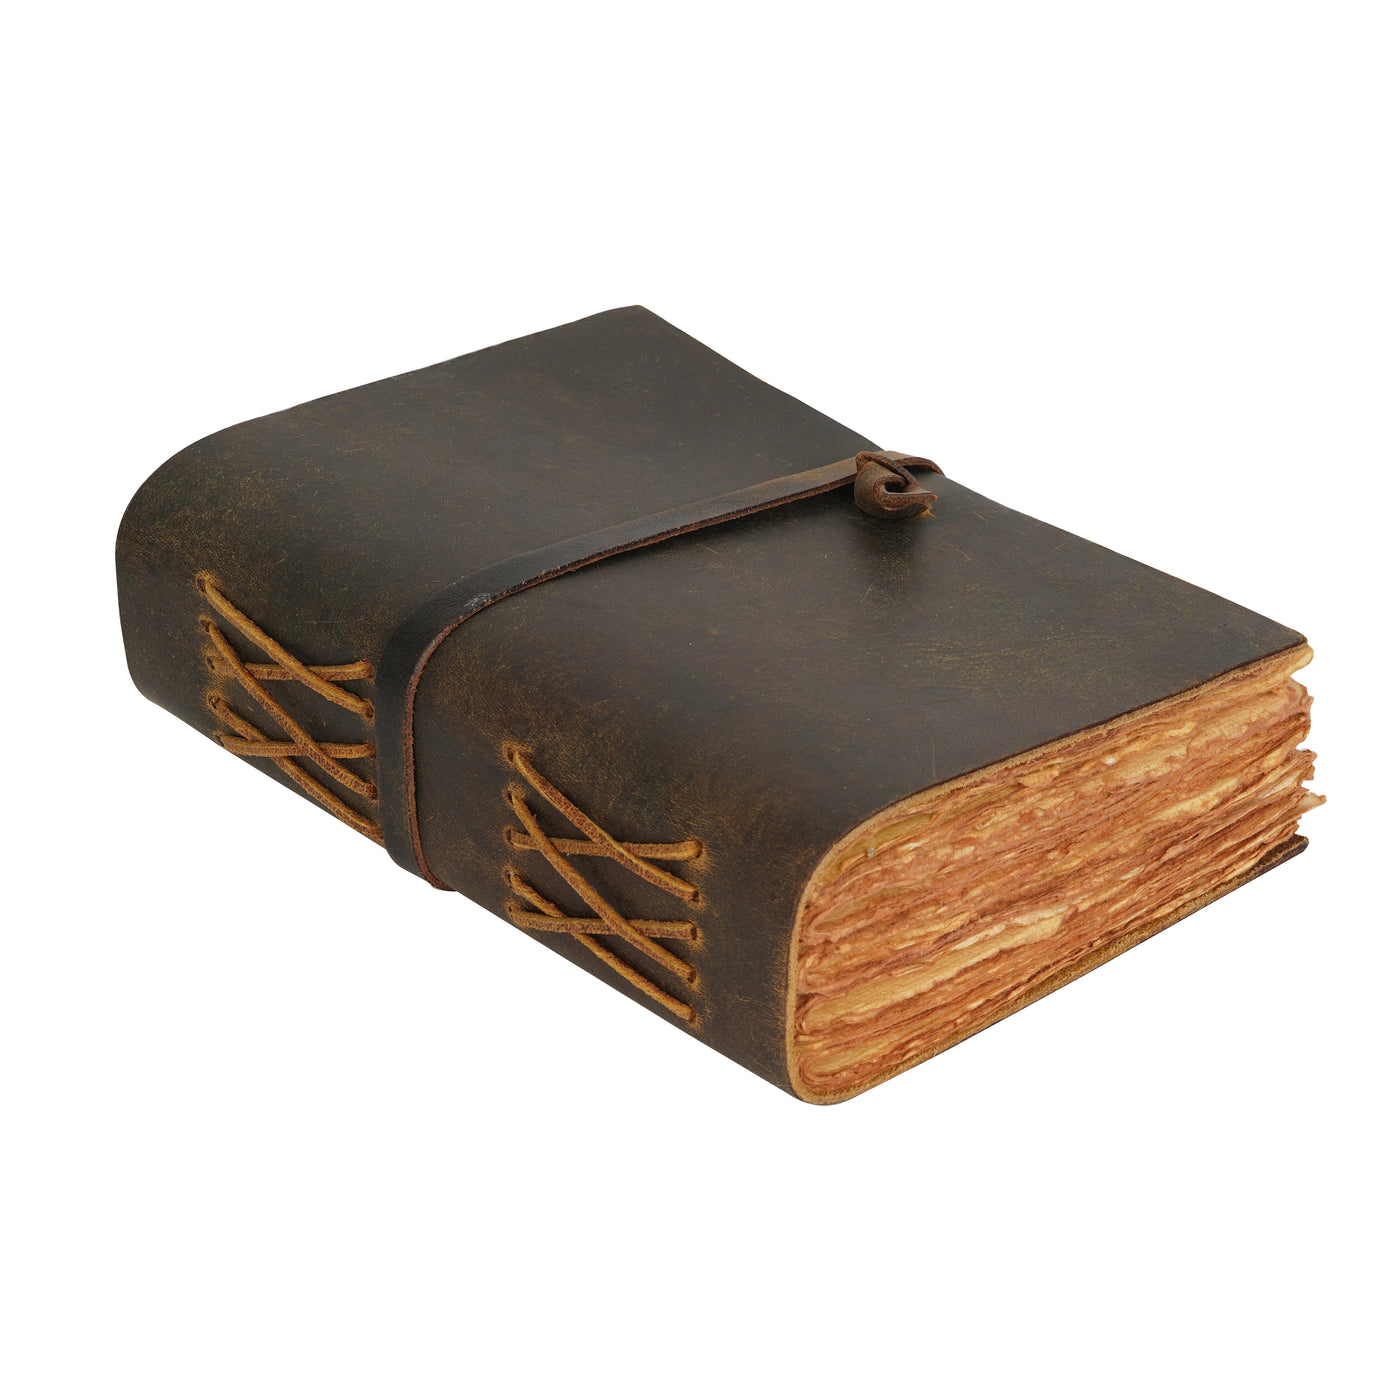 BROWN LEATHER BOUND JOURNAL - DECKLE EDGE WATERCOLOR PAPER – Leather Village